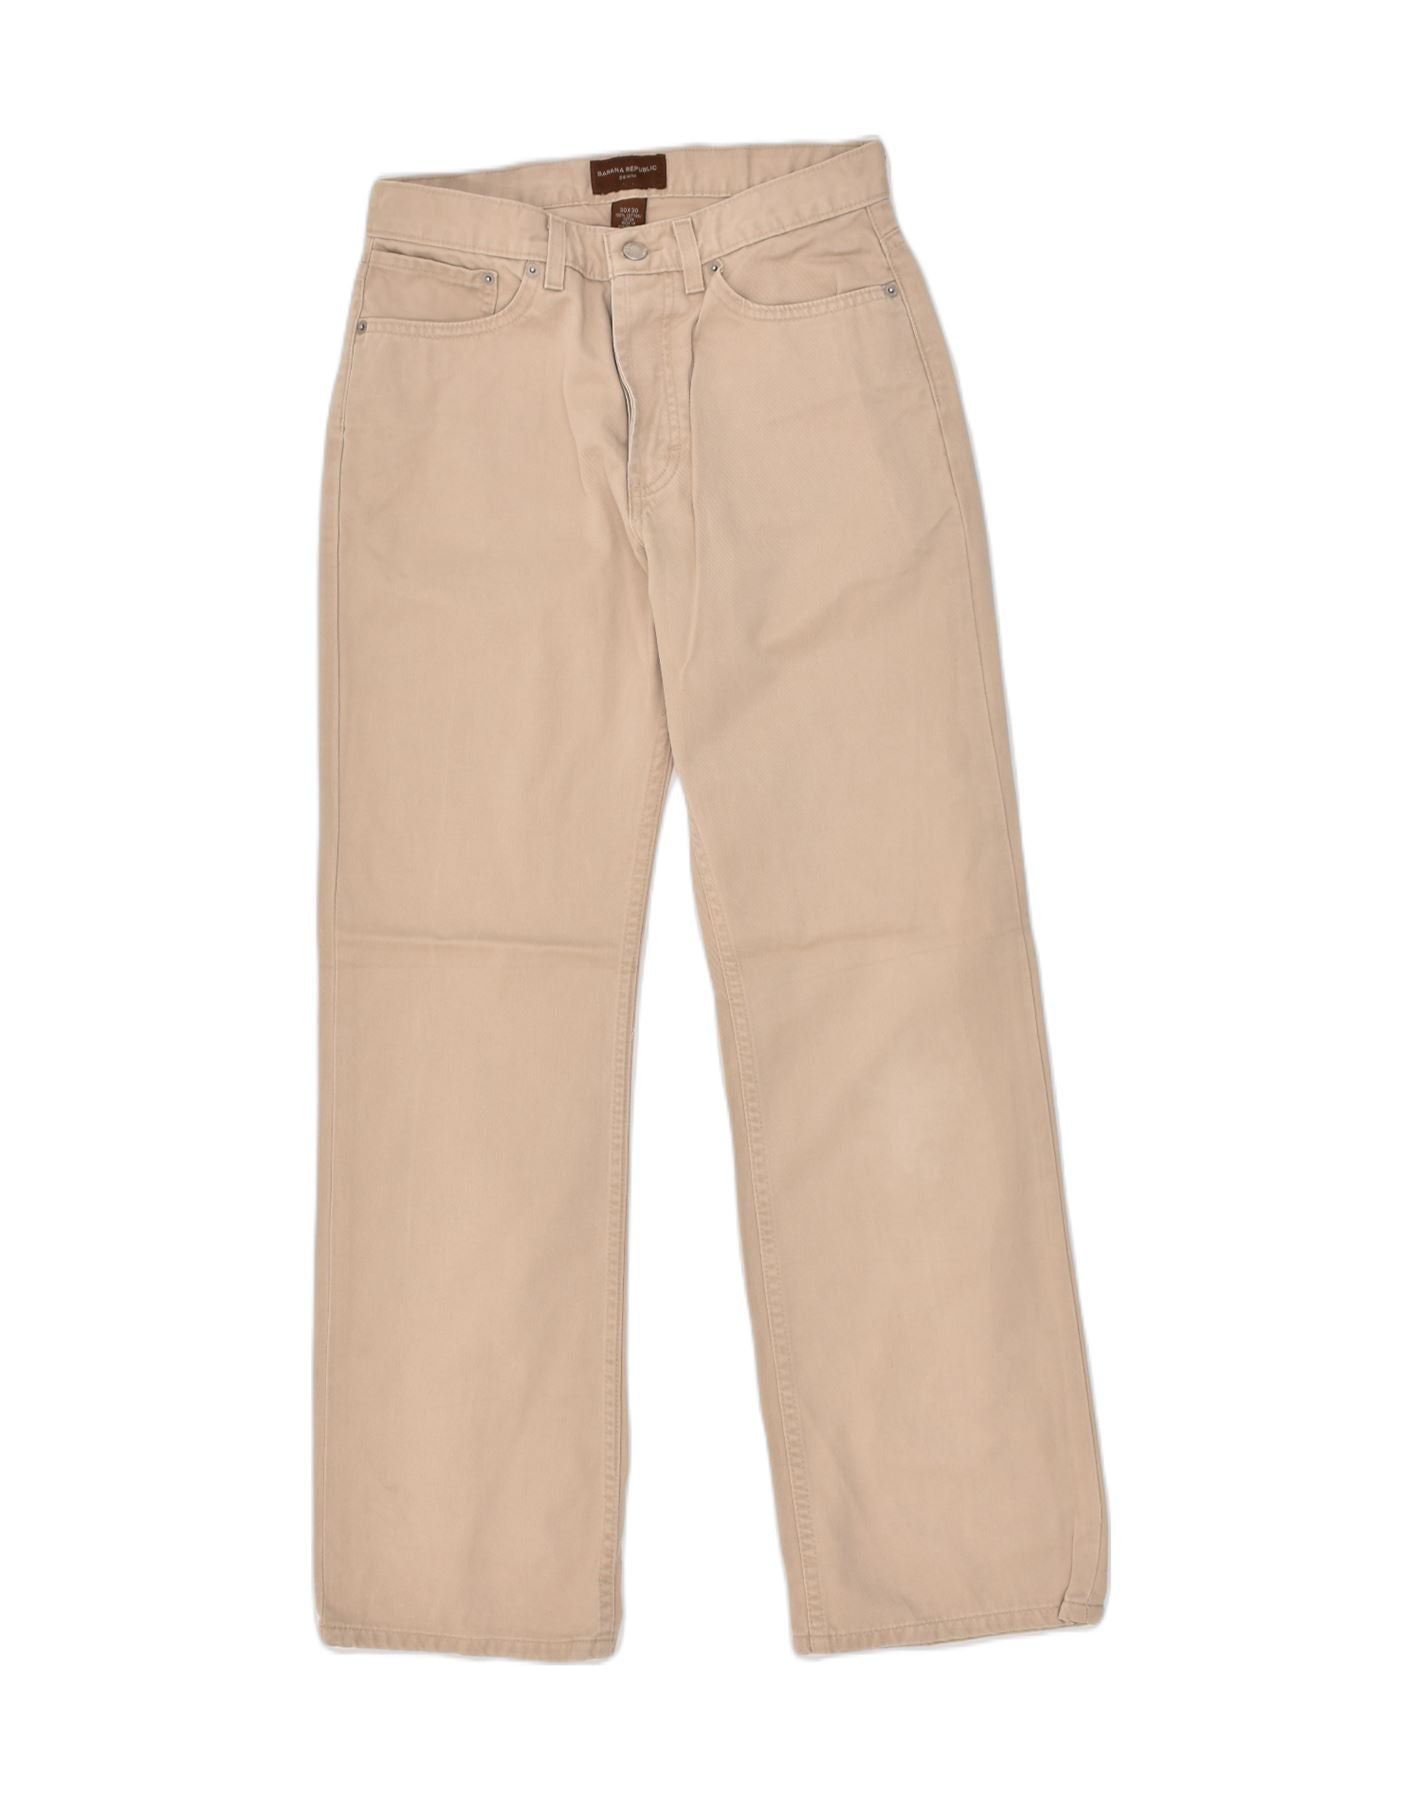 BANANA REPUBLIC Mens Straight Casual Trousers W30 L30 Beige Cotton, Vintage & Second-Hand Clothing Online